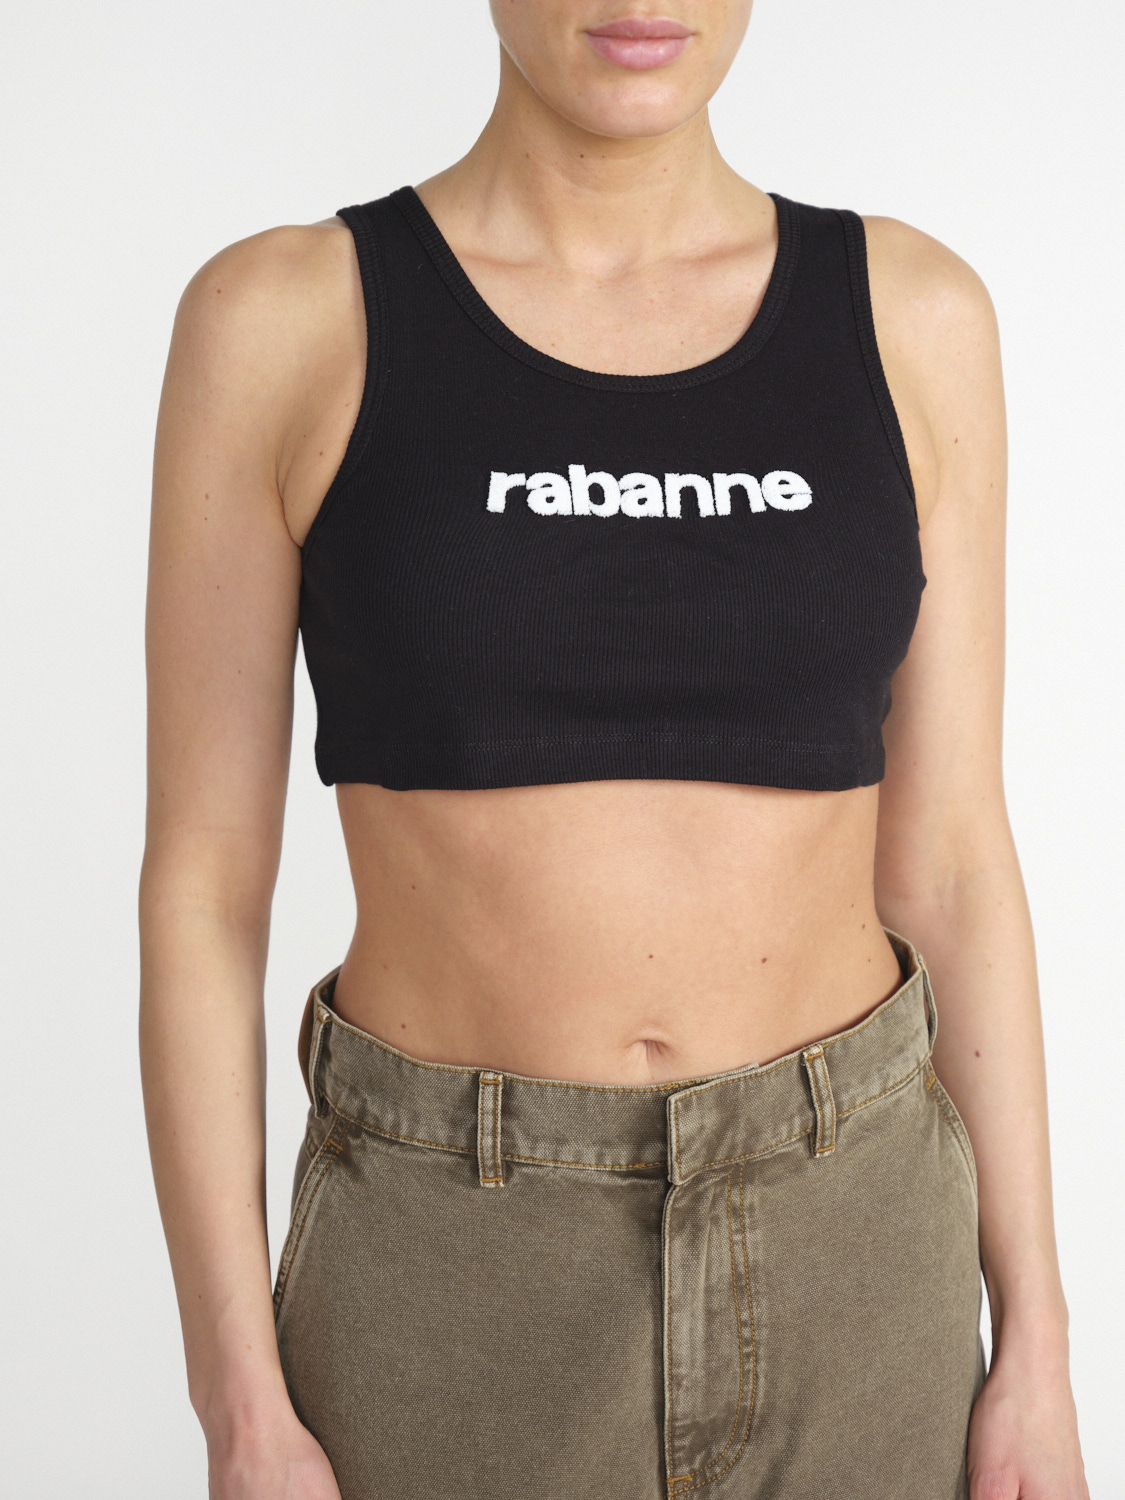 rabanne Cropped Tanktop with lableprint  white XS